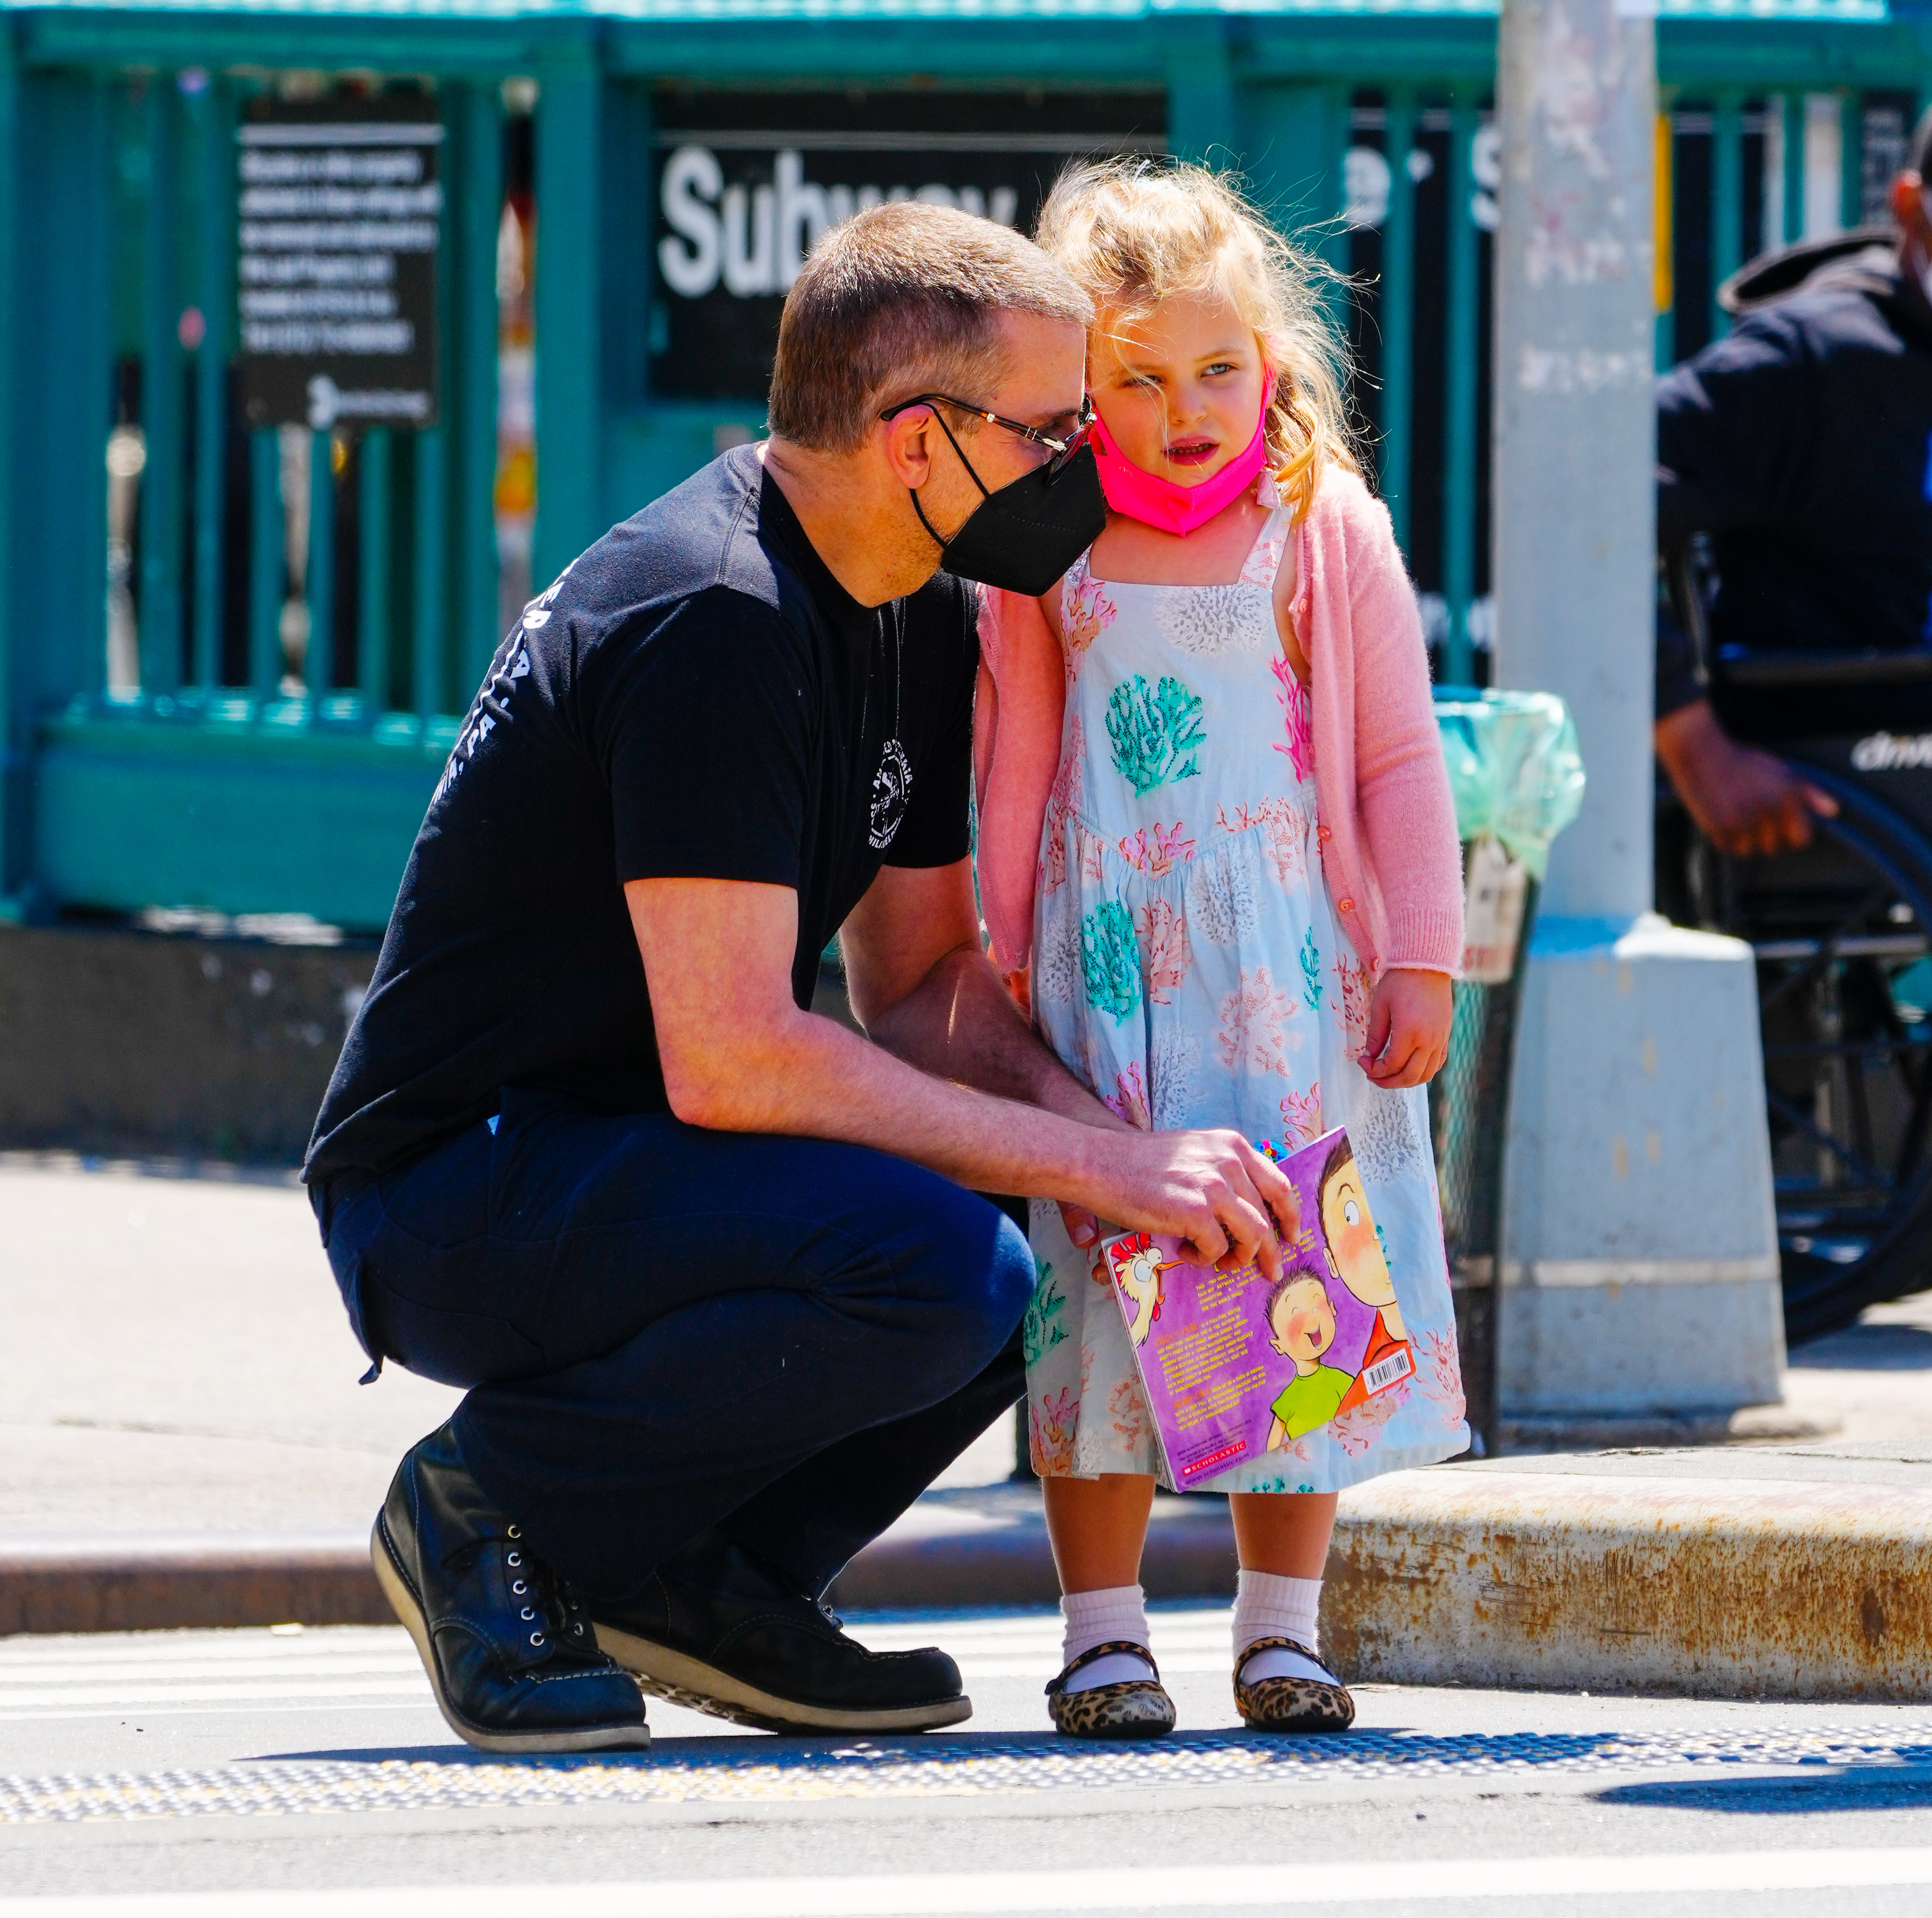 Bradley Cooper with daughter Lea on May 17, 2021 in New York City. | Source: Getty Images